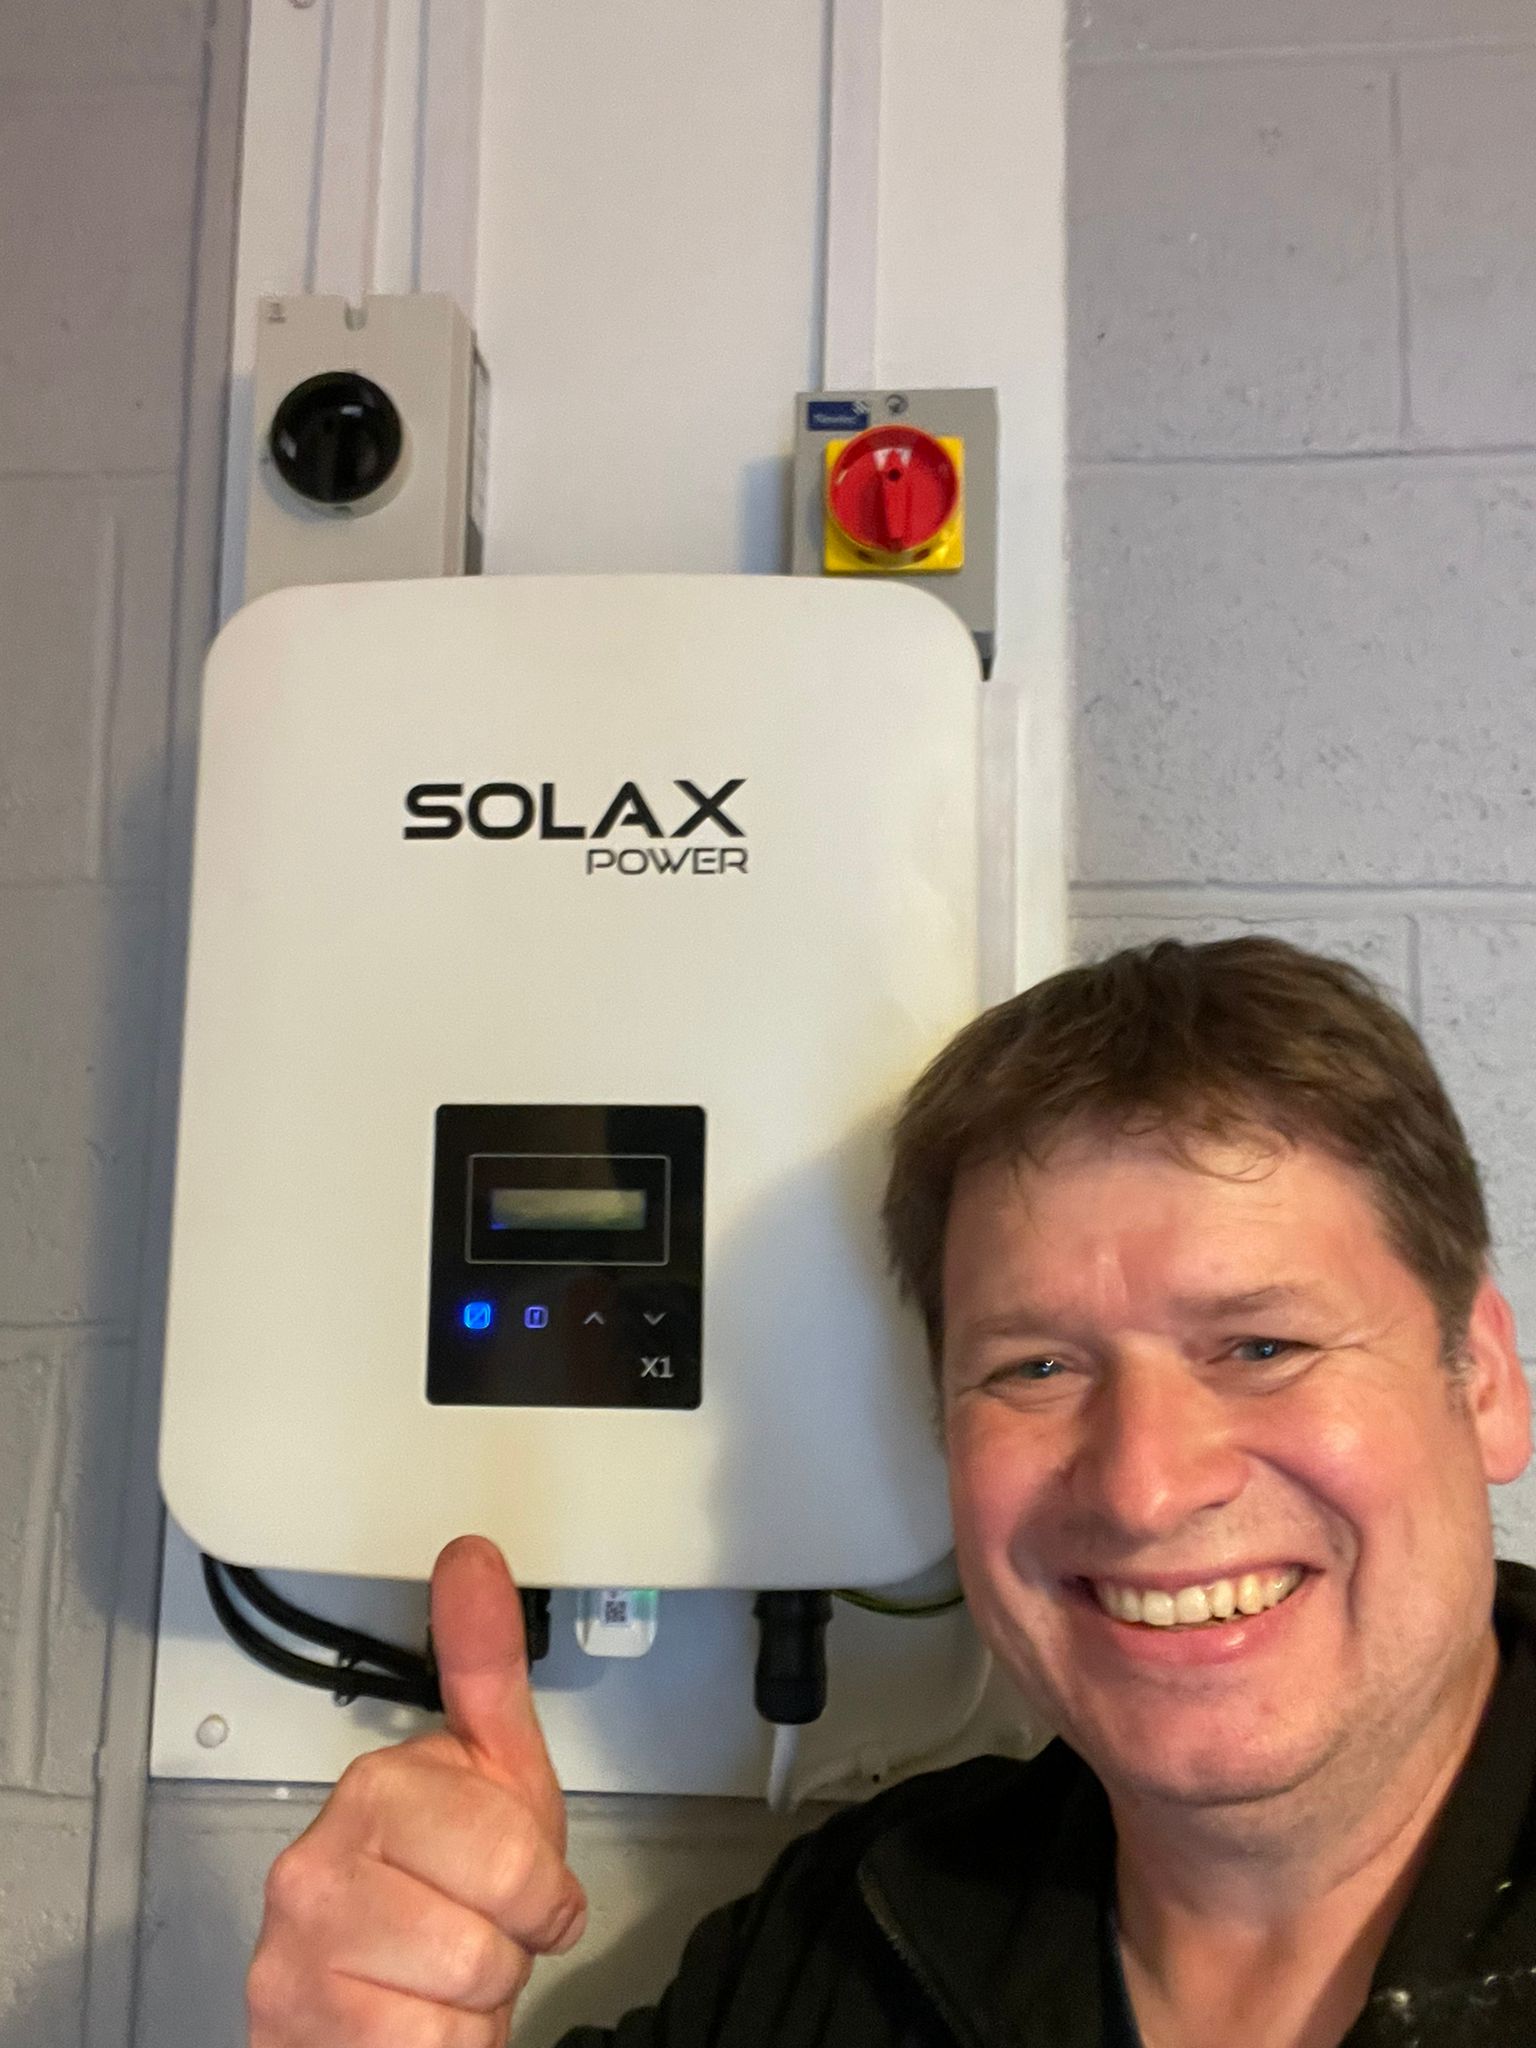 Chris smiling with a thumbs up, behind him is a Solax Power Solax inverter